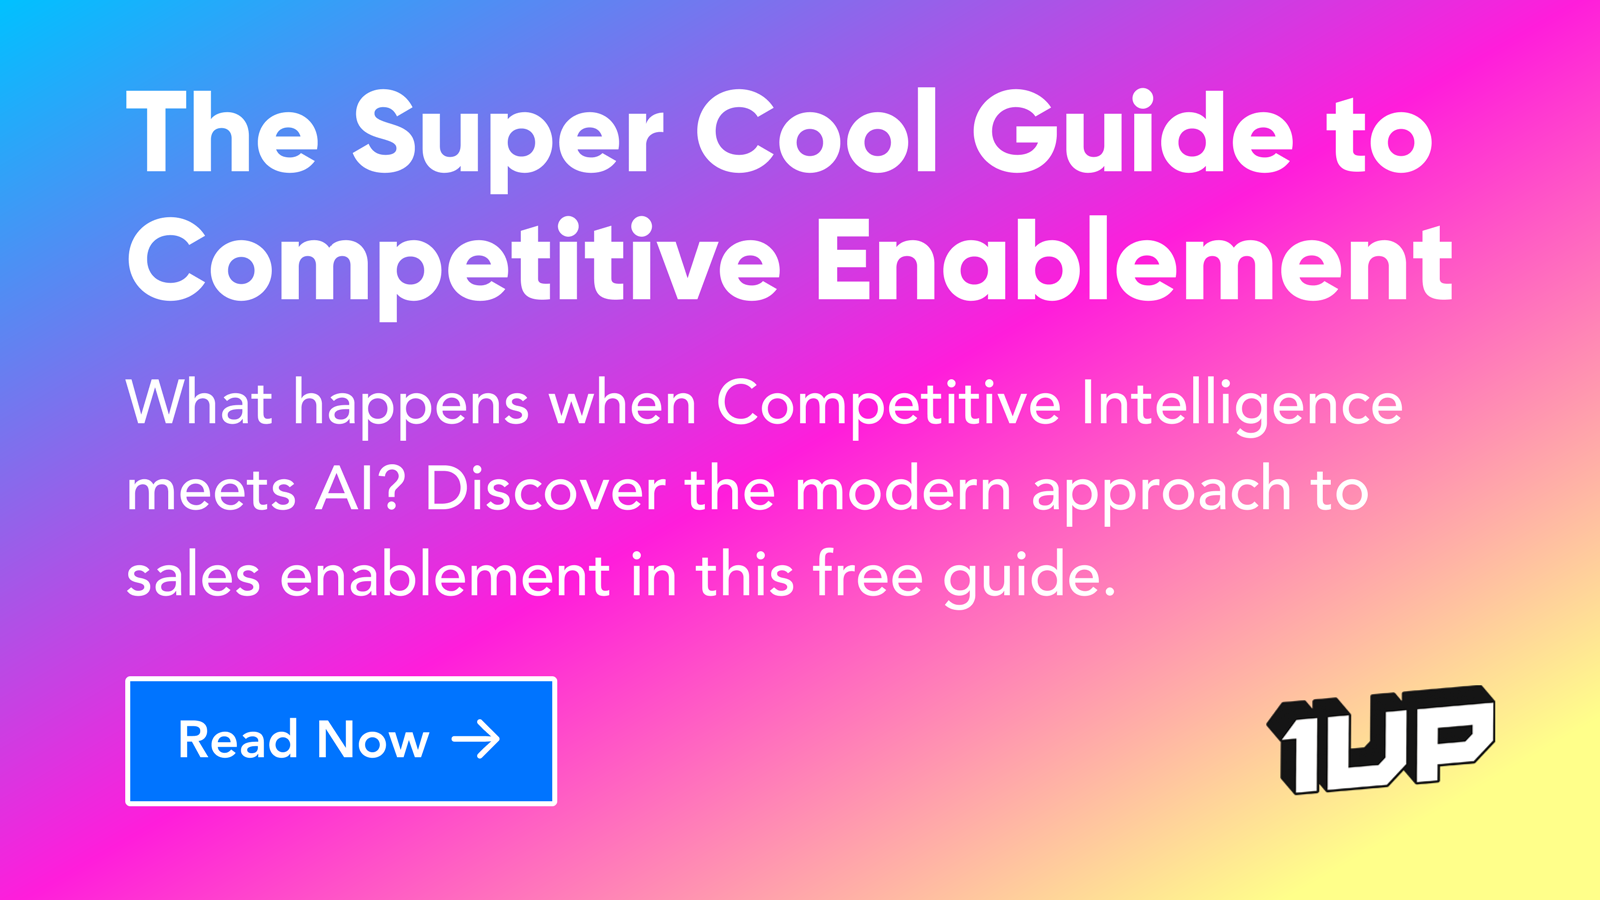 The Super Cool Guide to Competitive Intelligence